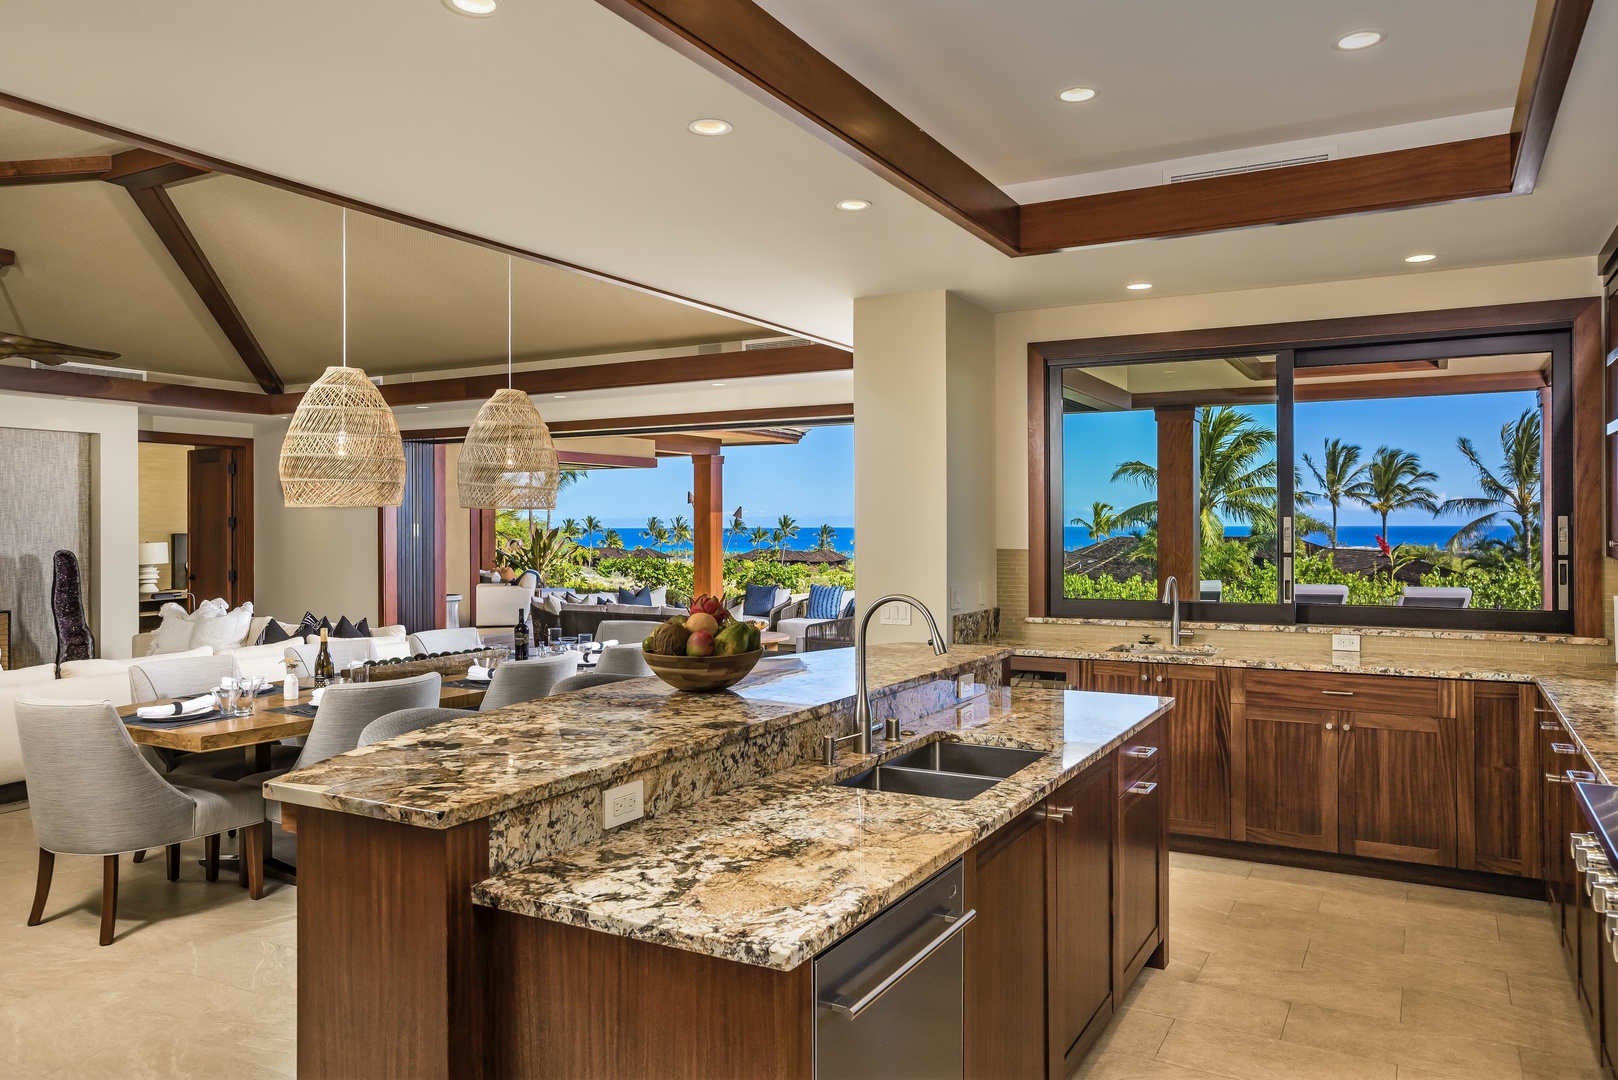 Kailua Kona Vacation Rentals, 4BD Kulanakauhale (3558) Estate Home at Four Seasons Resort at Hualalai - Stunning open concept kitchen with granite countertops, top tier appliances, two sinks, custom African mahogany cabinetry and a large pass through window to the outdoor BBQ area.